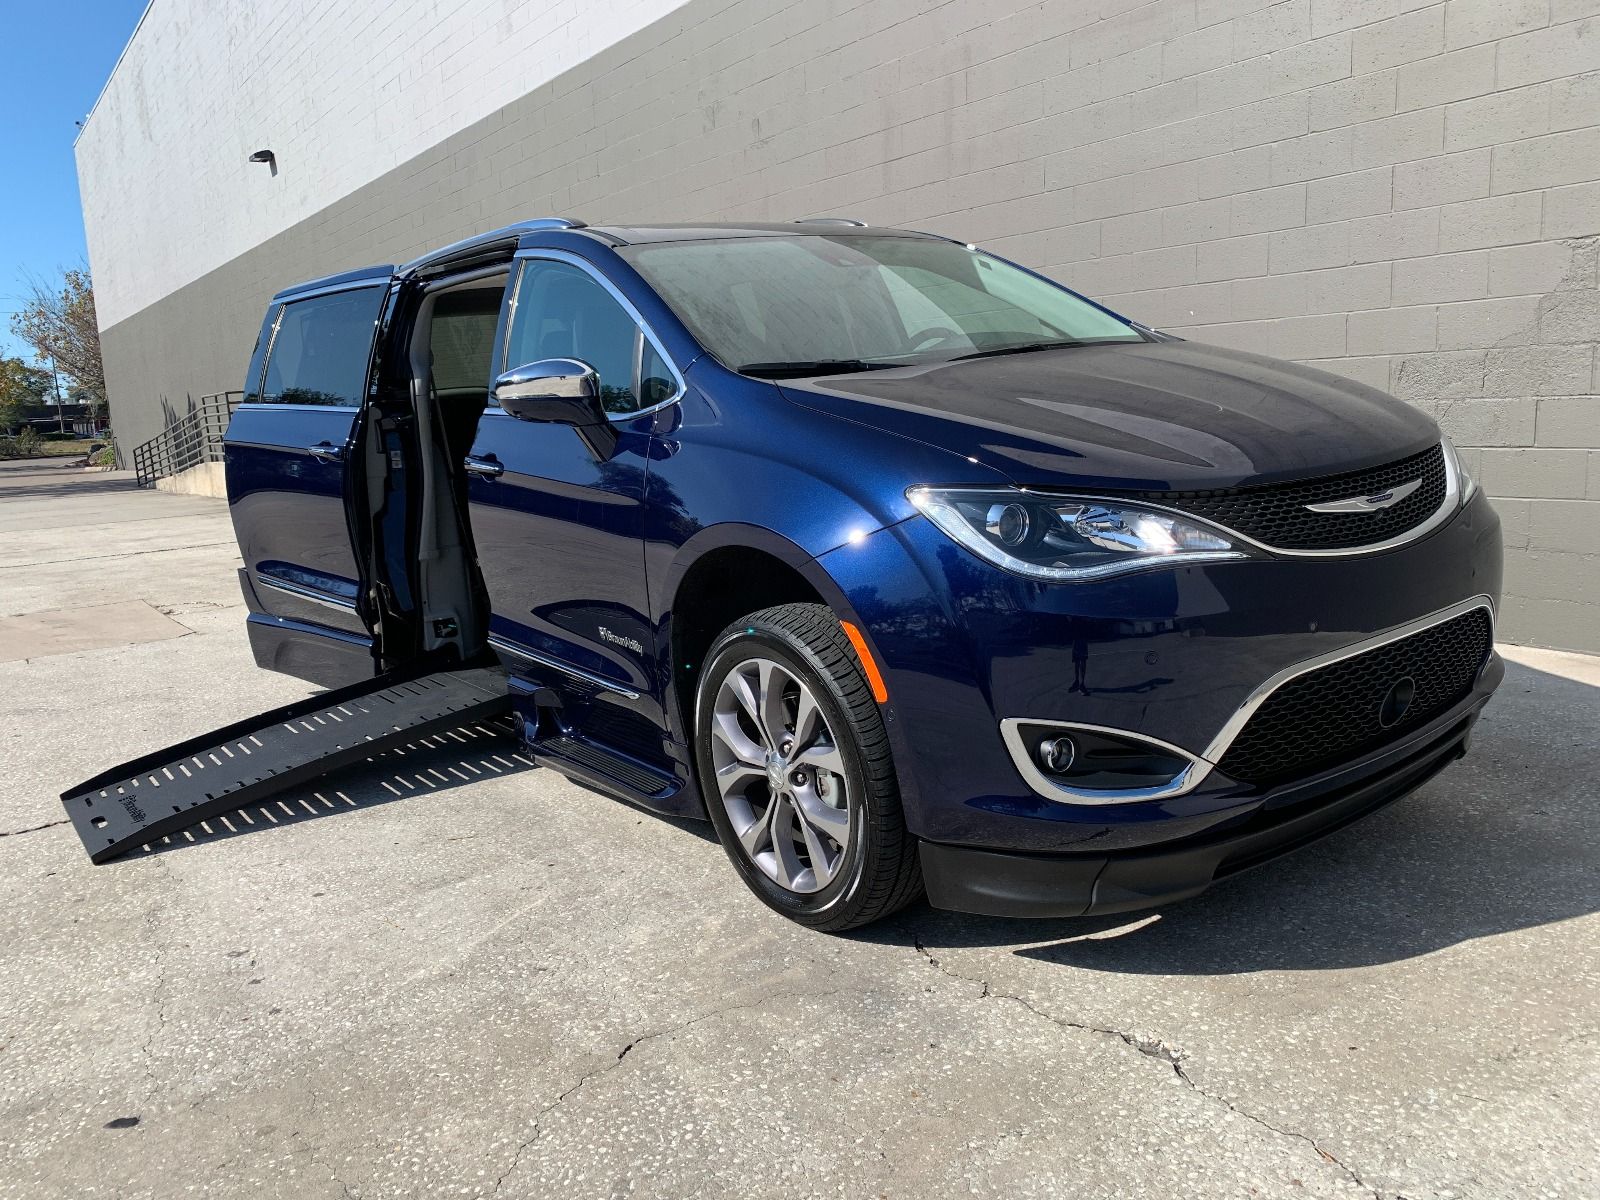 Blue 2020 Chrysler Pacifica wheelchair van with ramp deployed from passenger sliding door, as seen from front passenger angle.